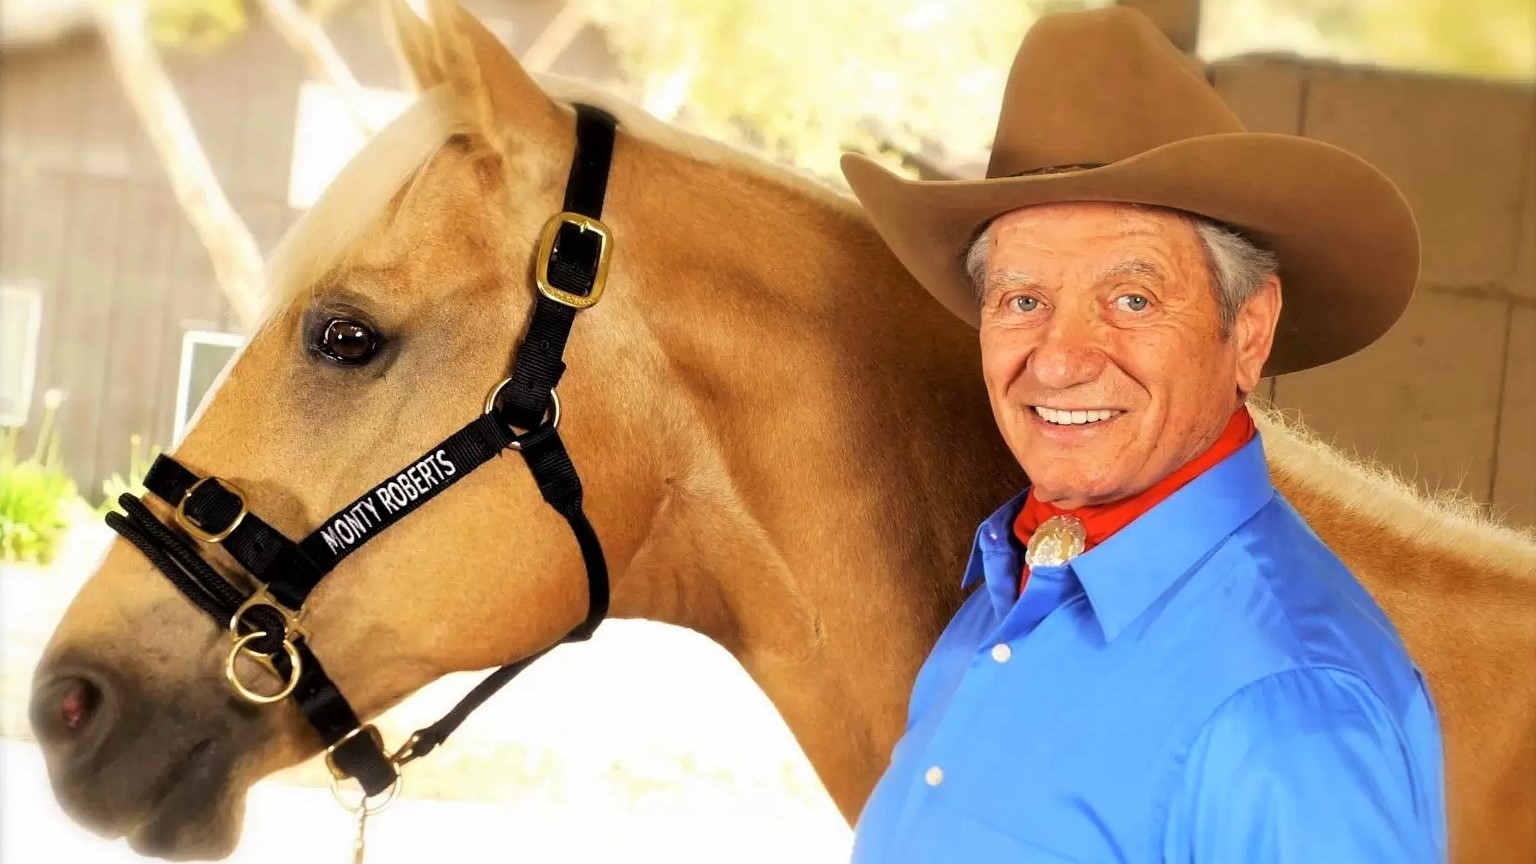 Monty Roberts, natural horsemanship trainer facts, stats, and story